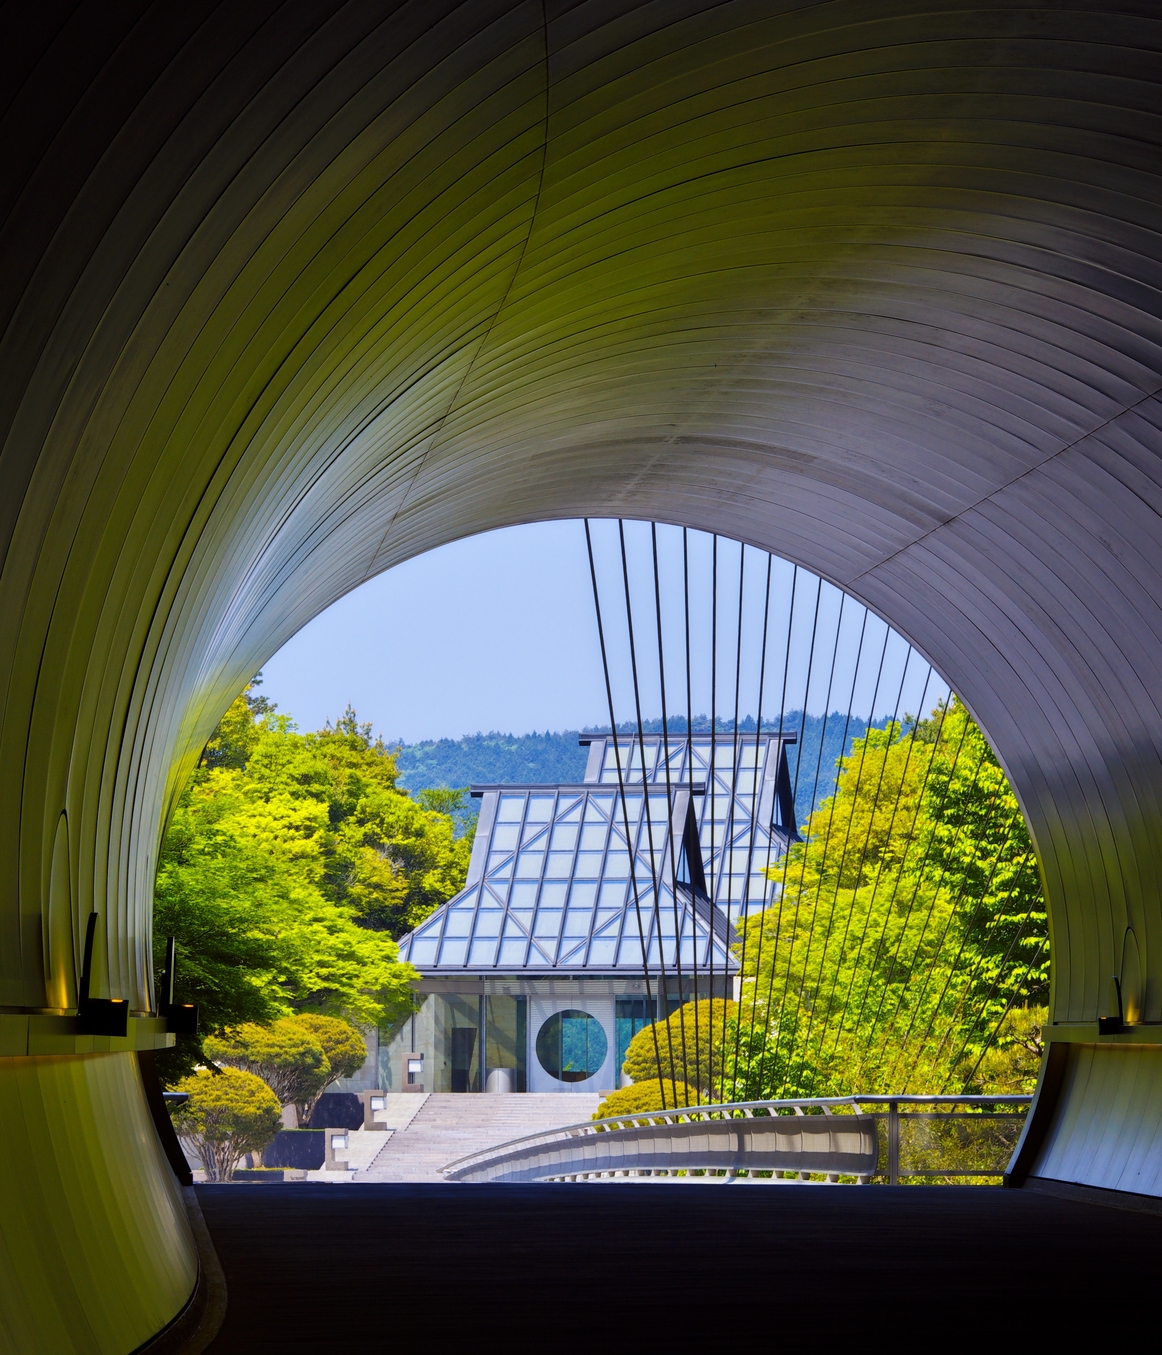 museums designed by famous Japanese architects